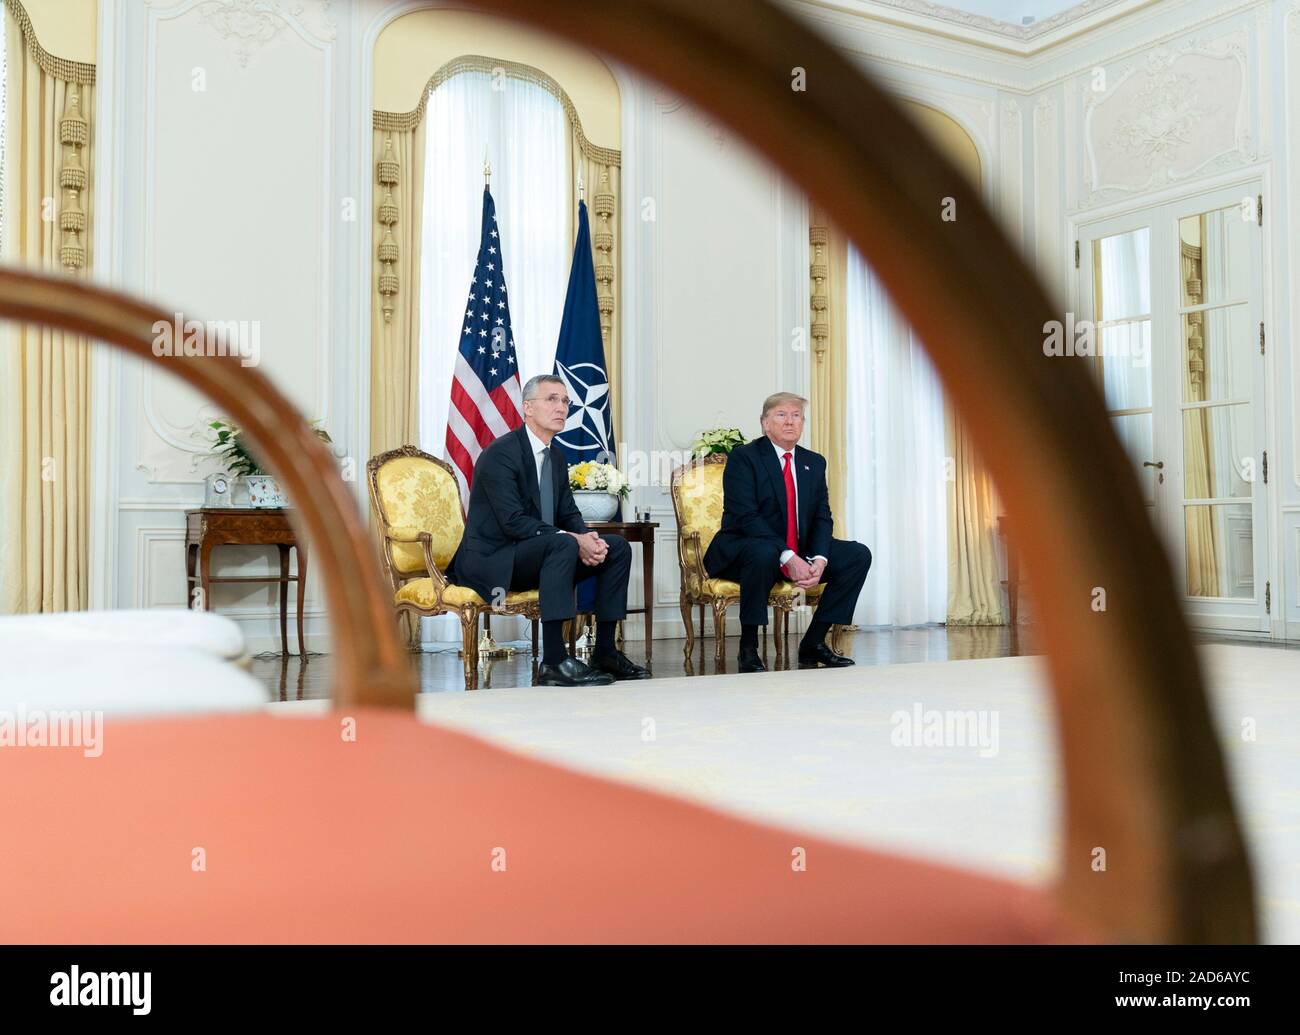 London, UK. 03 December, 2019. U.S. President Donald Trump holds a bilateral meeting with NATO Secretary General Jens Stoltenberg before the start of the NATO Summit at Winfield House December 3, 2019 in London, UK.   Credit: Shealah Craighead/Planetpix/Alamy Live News Stock Photo